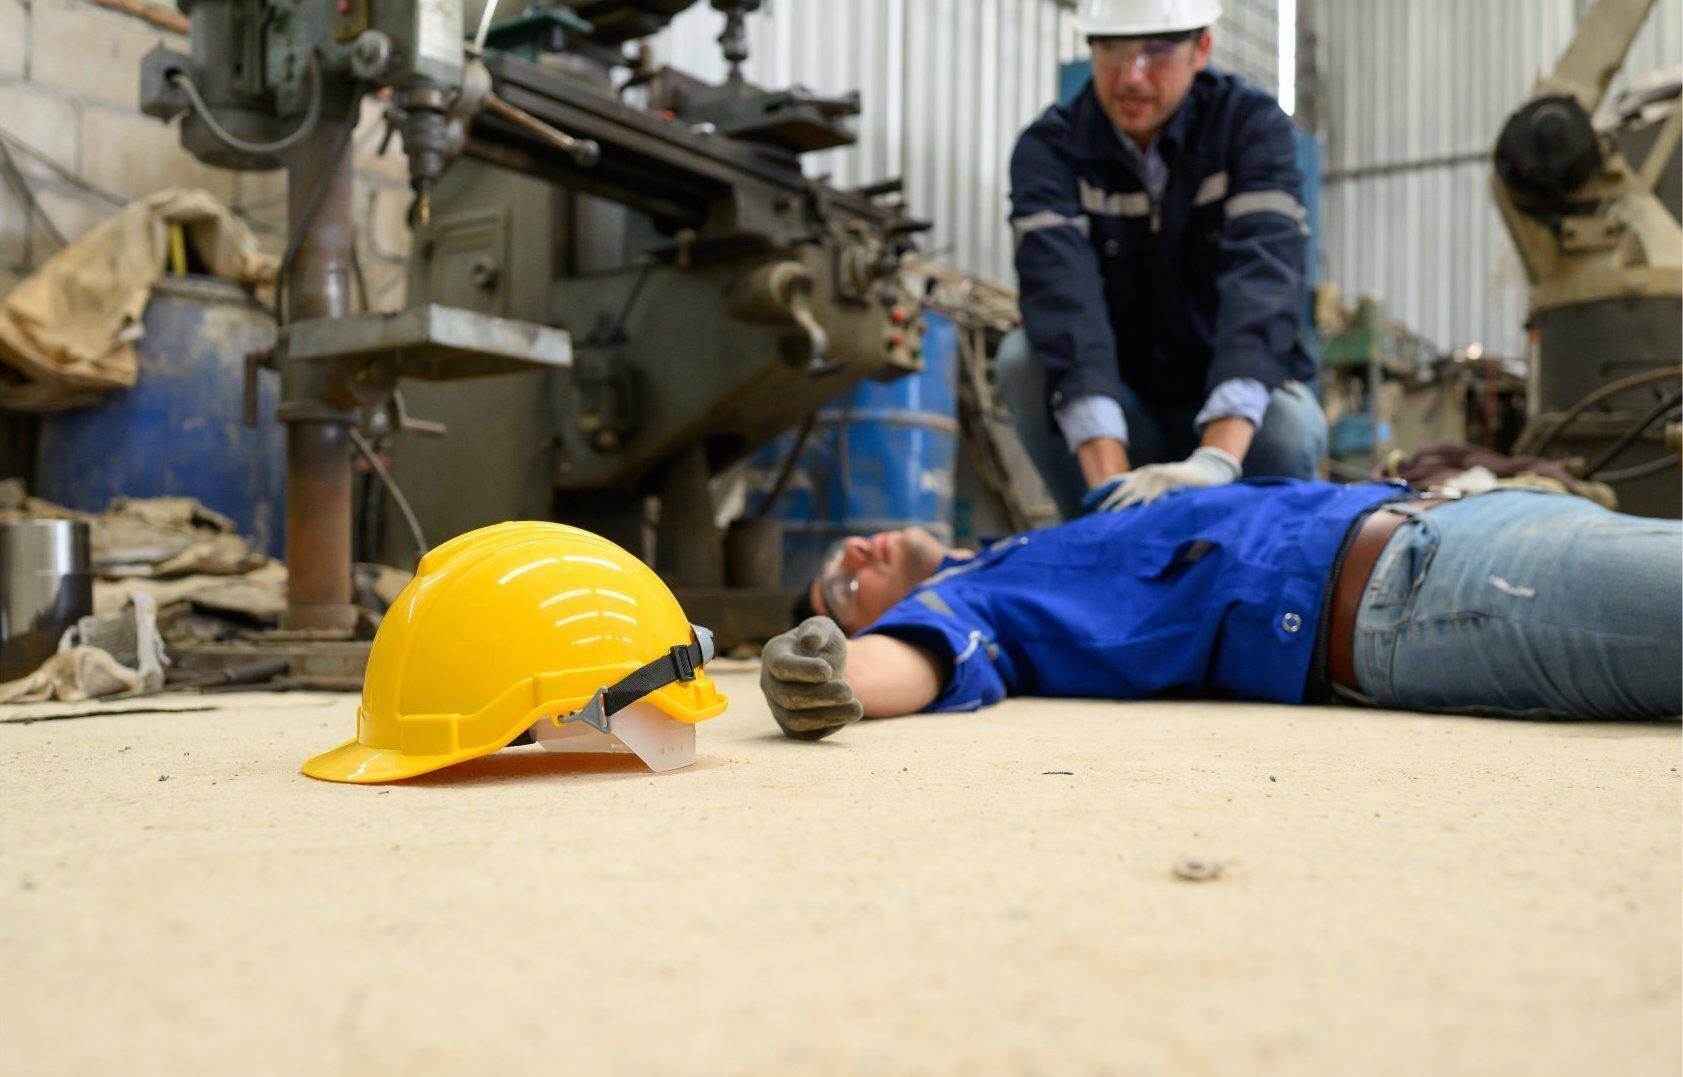 An unconscious man who has been injured on the job who will file for workers compensation in Canton, Georgia